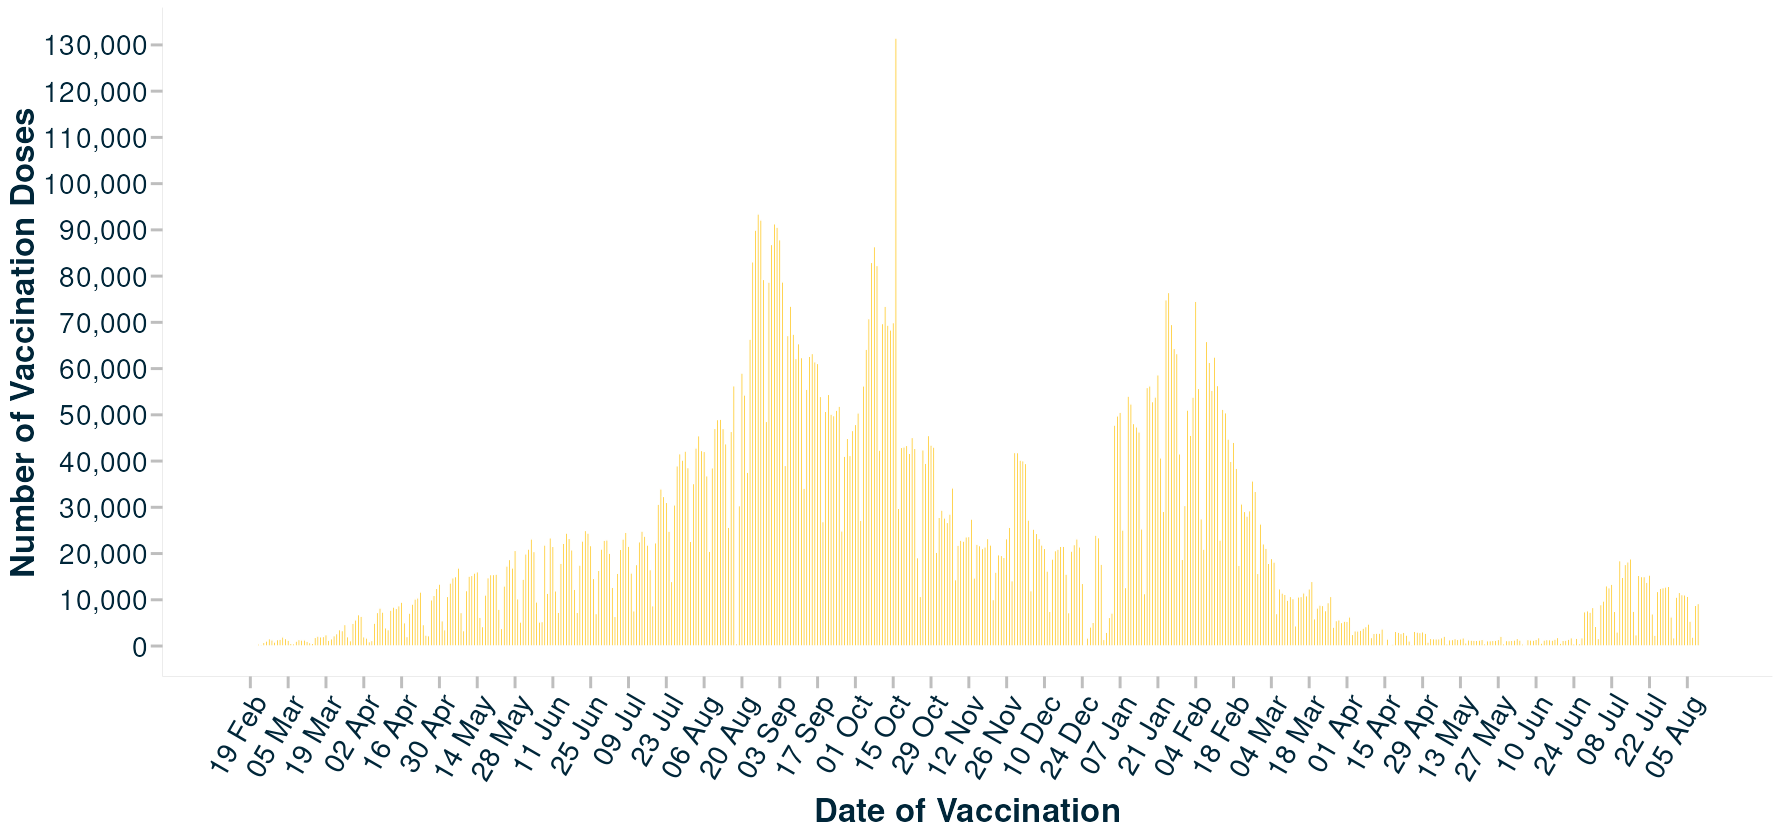 Vaccination doses administered per day